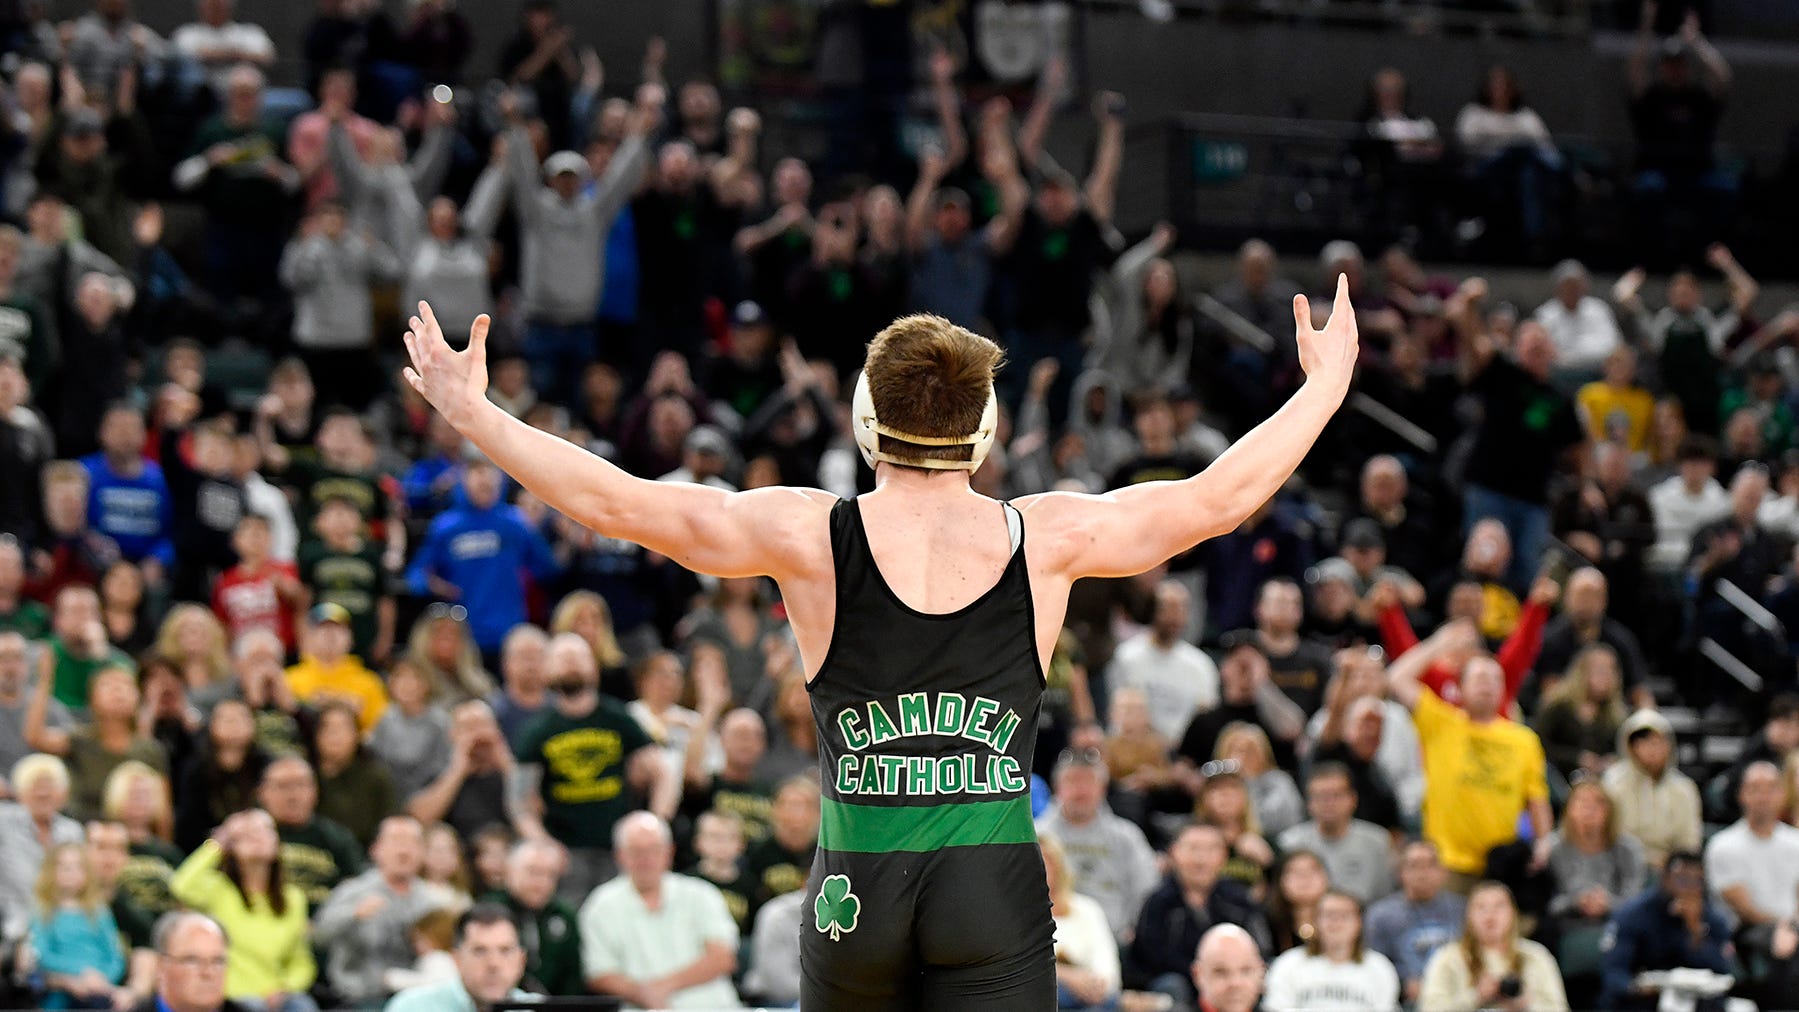 NJ Wrestling Championships Camden Catholic's Cosgrove fights way to title